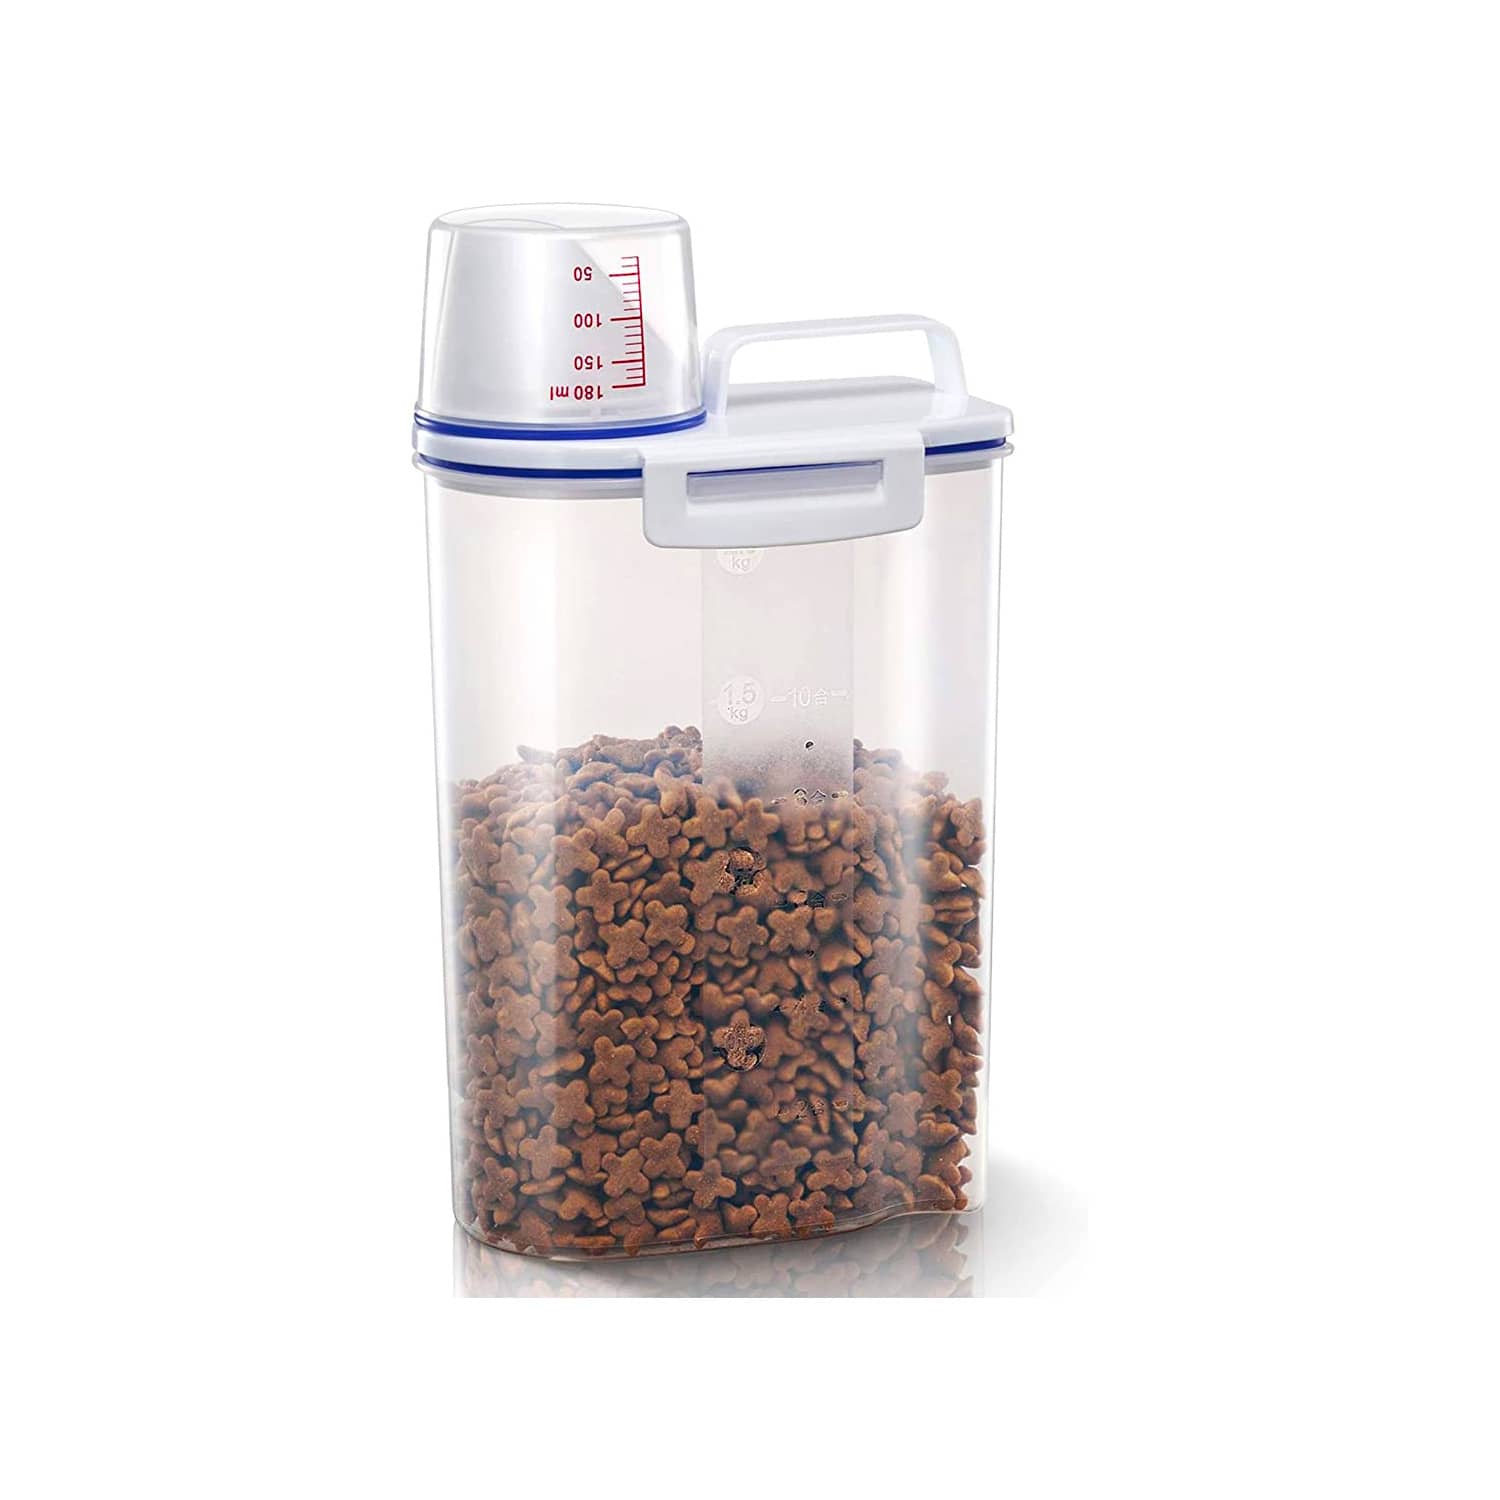 BauWow Pet Food Container